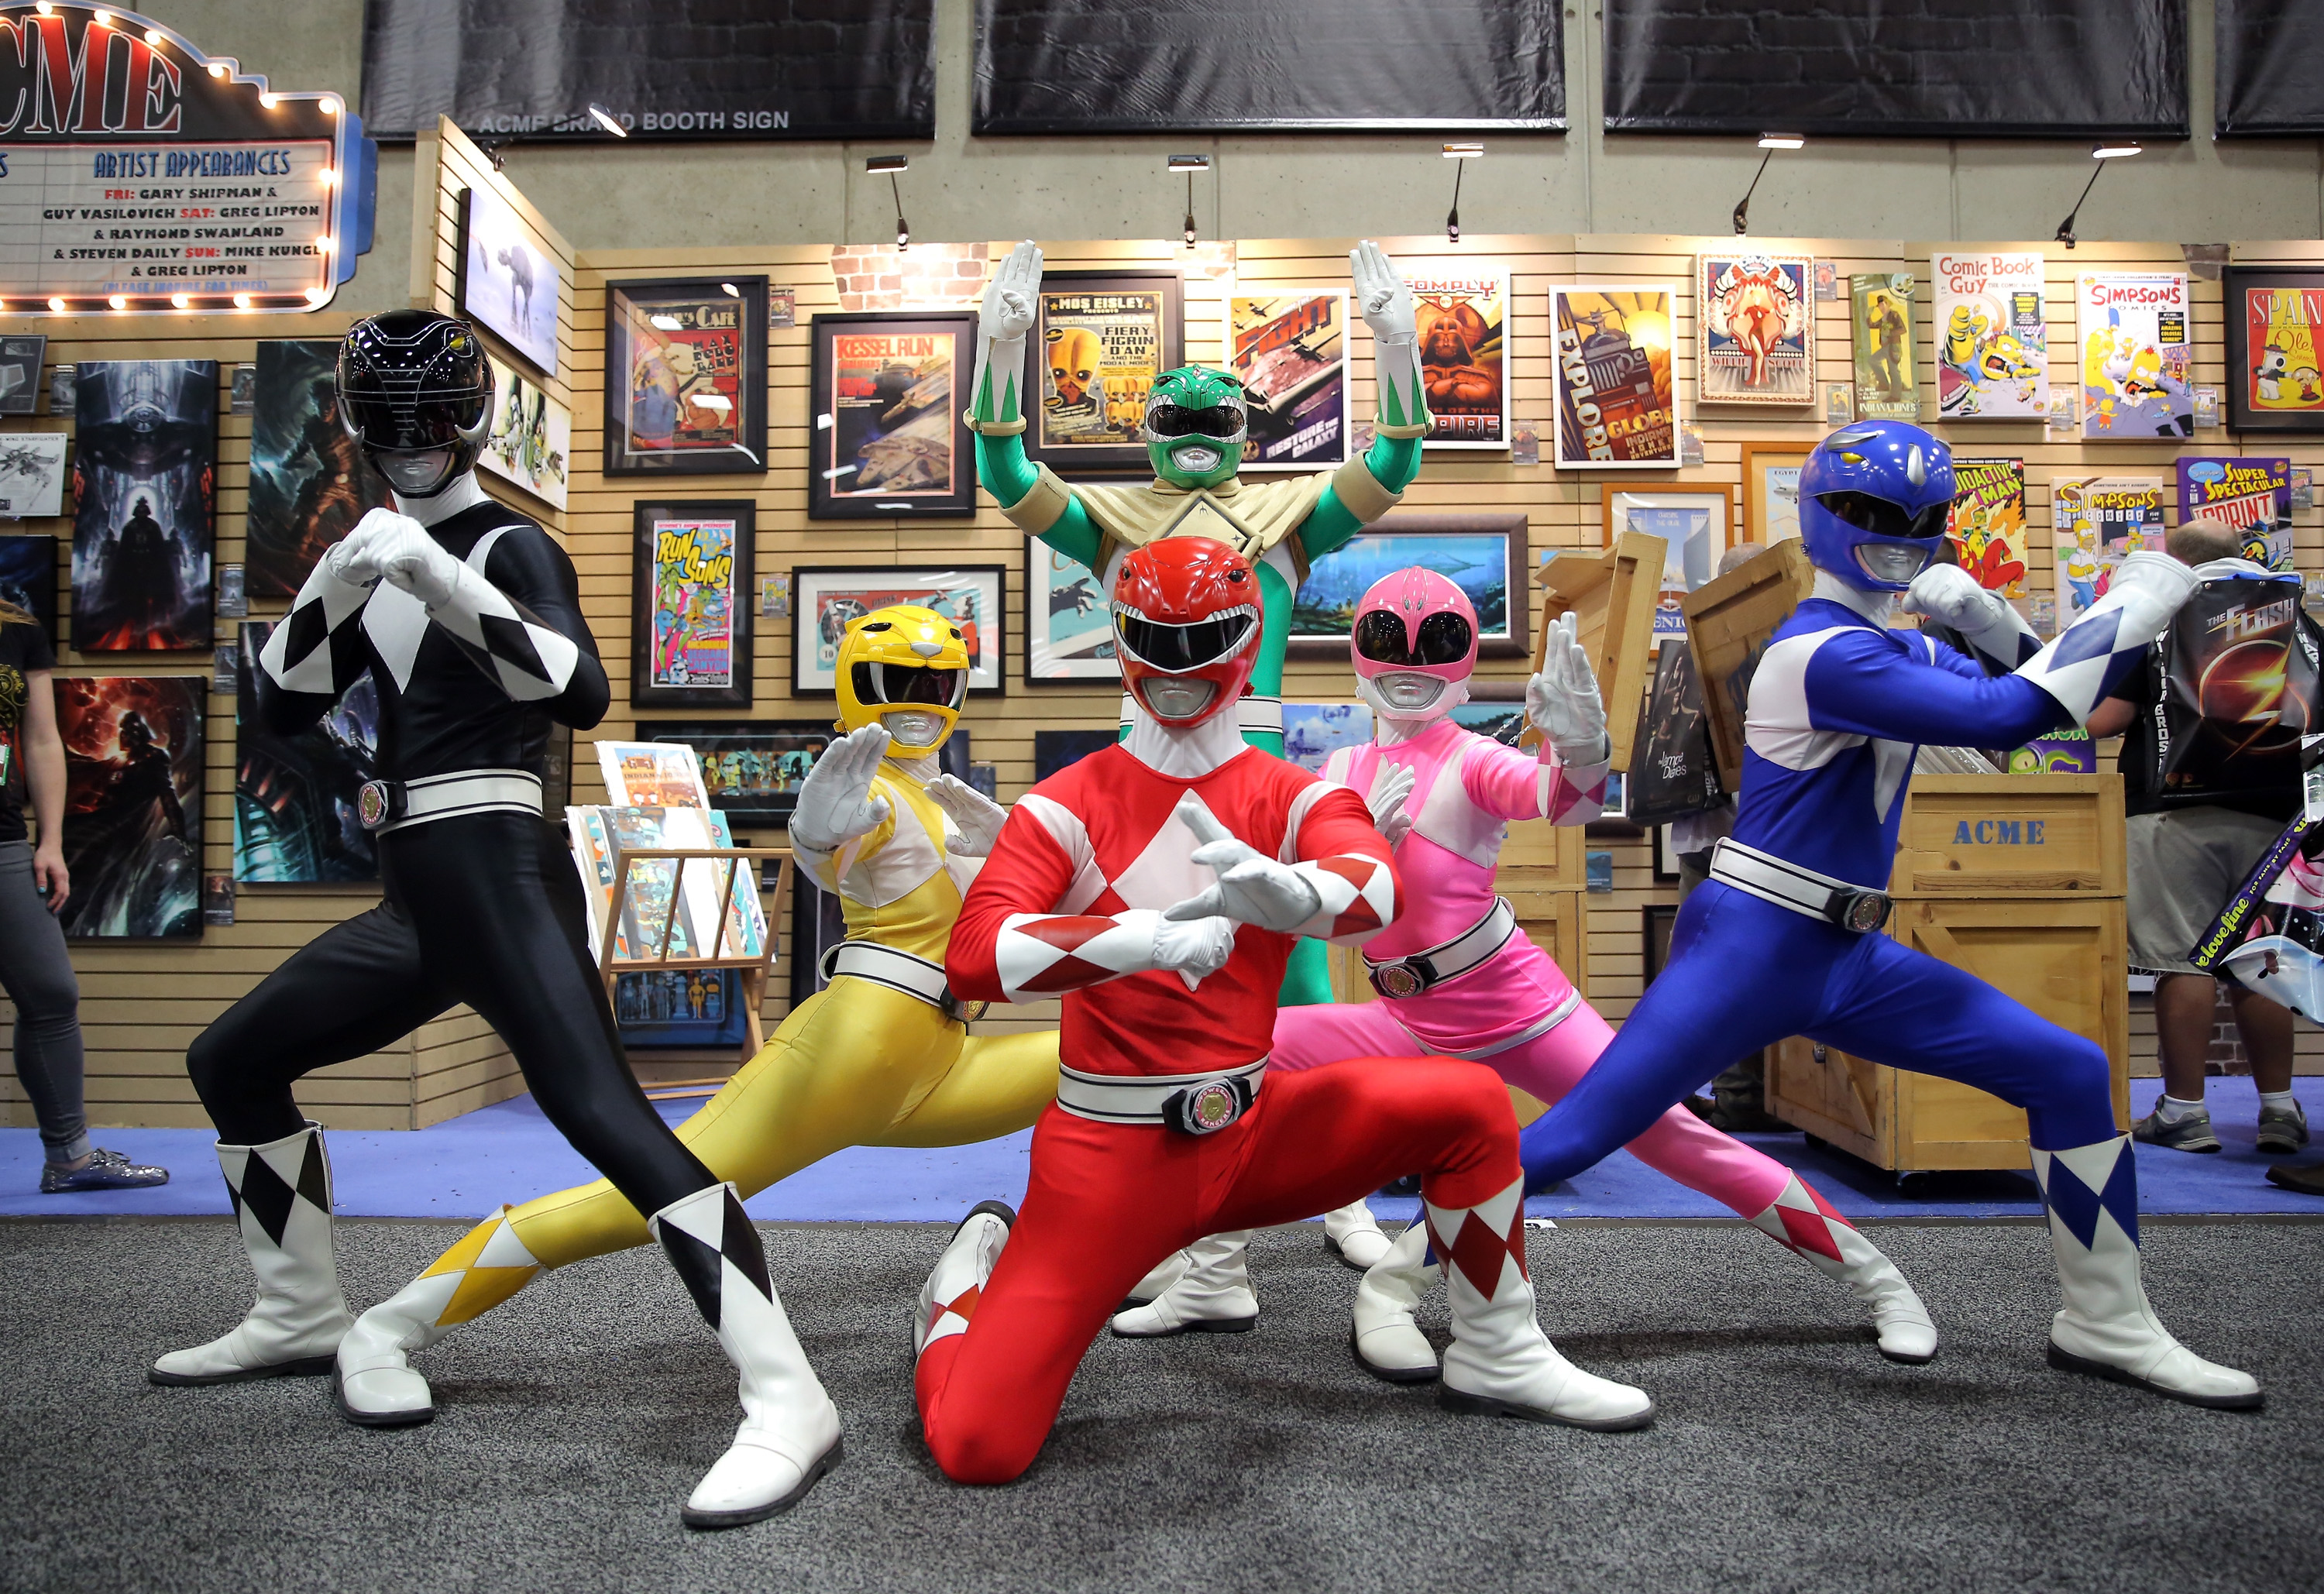 Vinyl Enthusiasts, Rejoice: The <i>Mighty Morphin Power Rangers</i> Soundtrack Is Coming to Wax